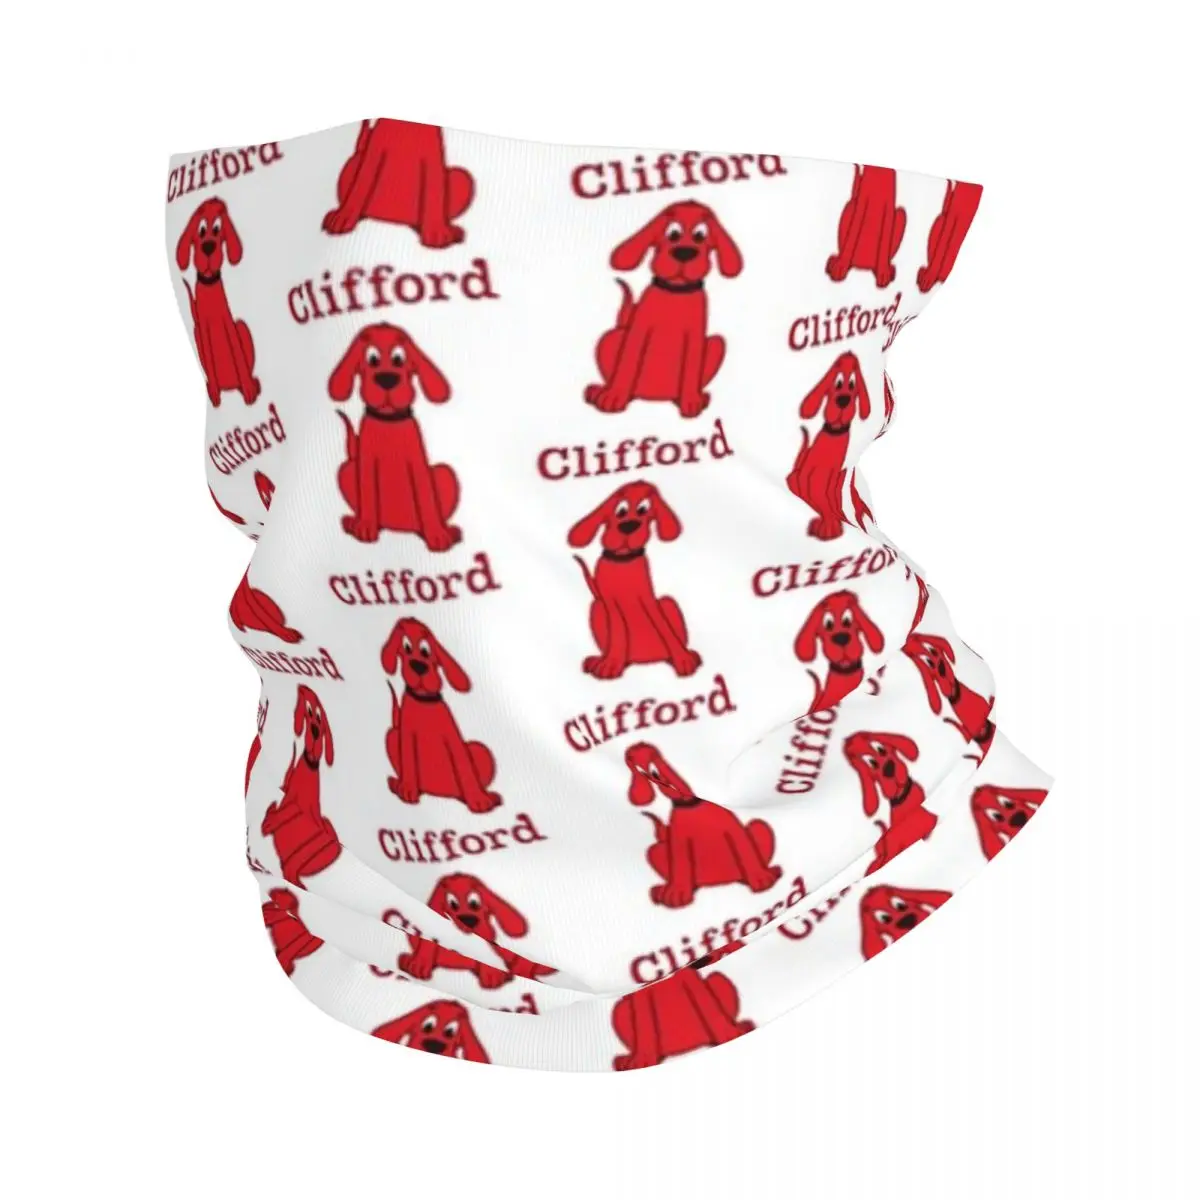 

Clifford The Big Red Dog Bandana Neck Gaiter Printed Wrap Scarf Warm Cycling Scarf Outdoor Sports Unisex Adult Windproof